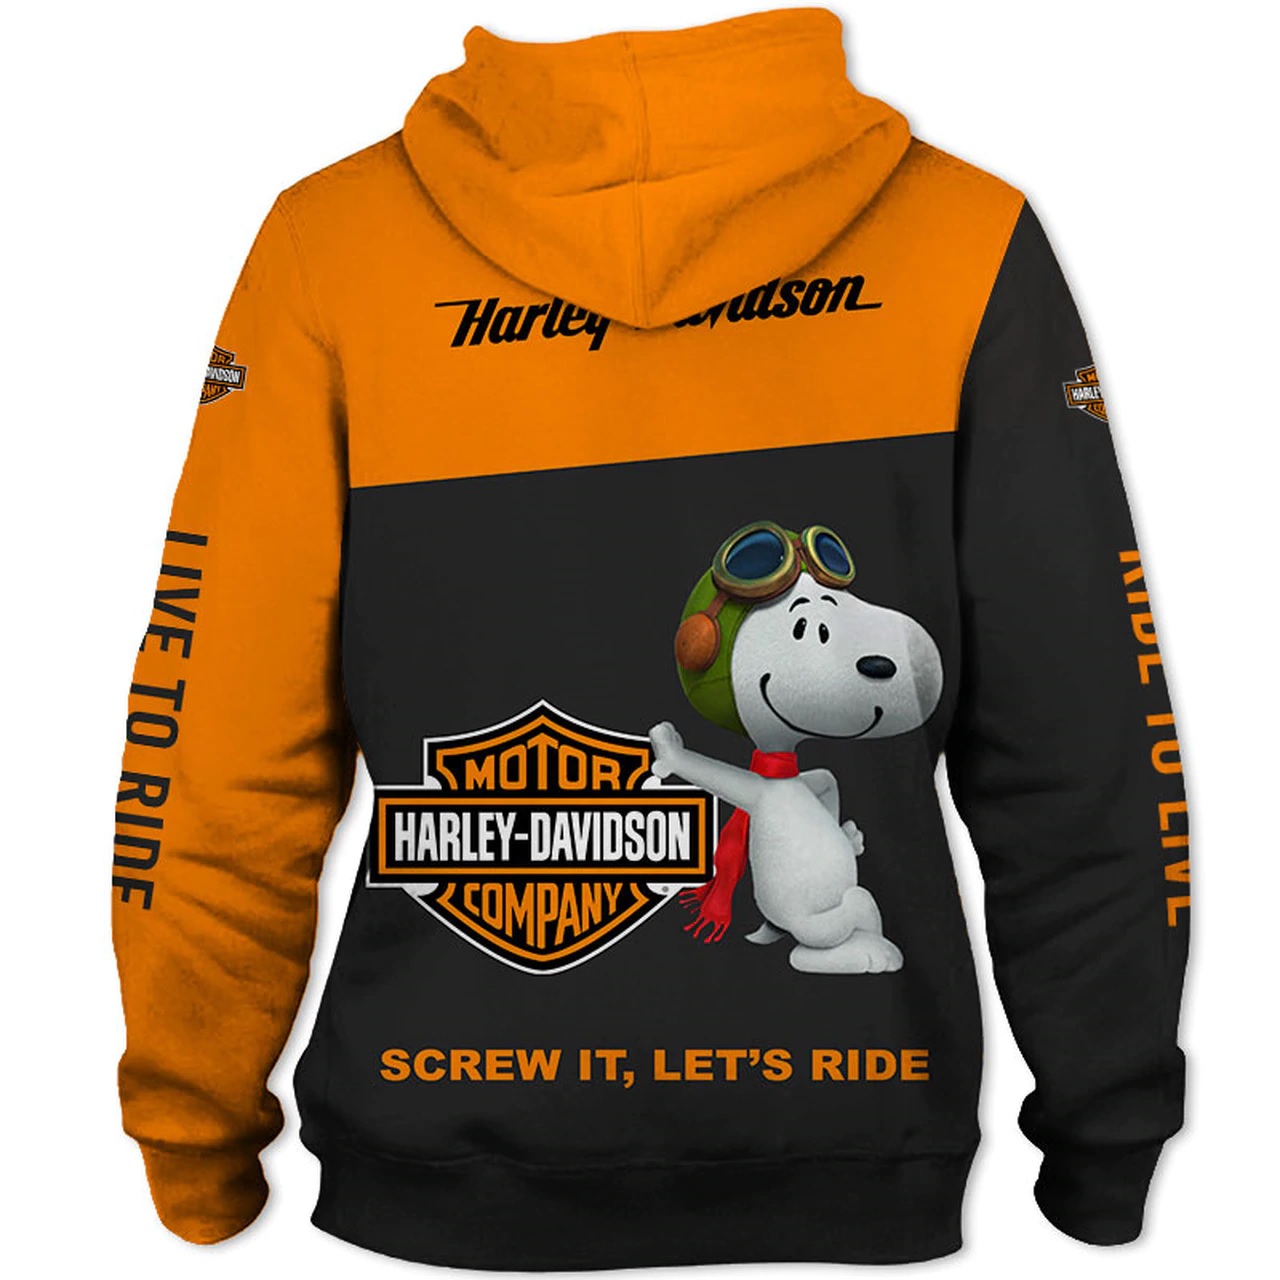 Harley-davidson motorcycle snoopy screw it let's ride all over print hoodie - back